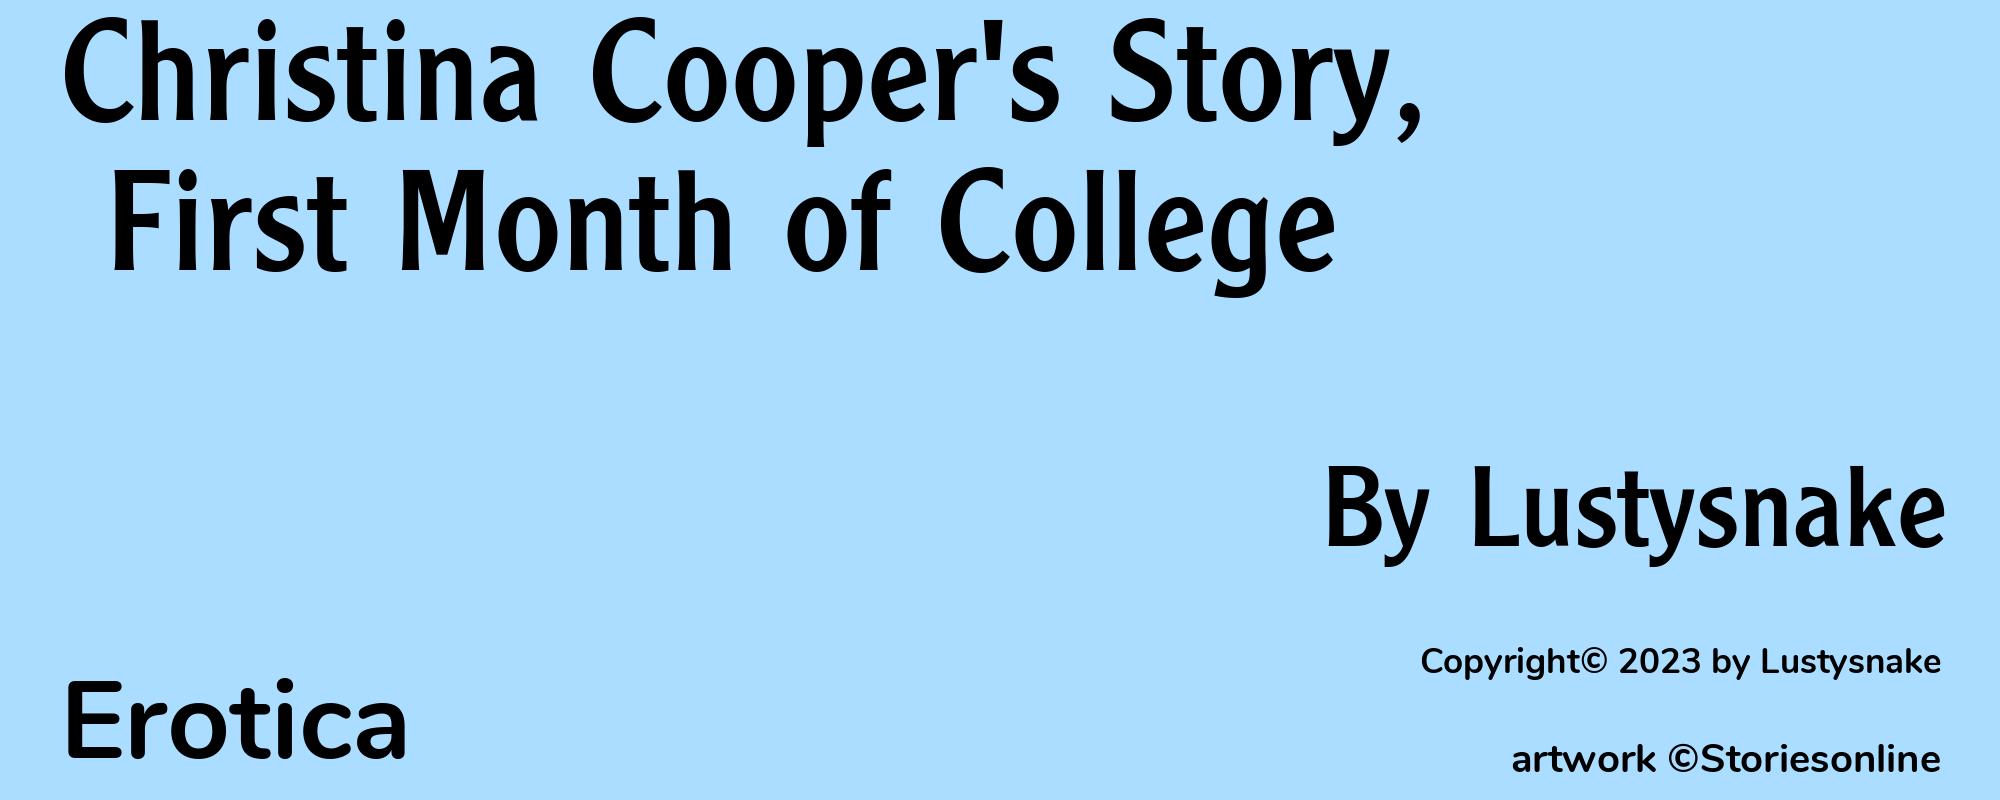 Christina Cooper's Story, First Month of College - Cover